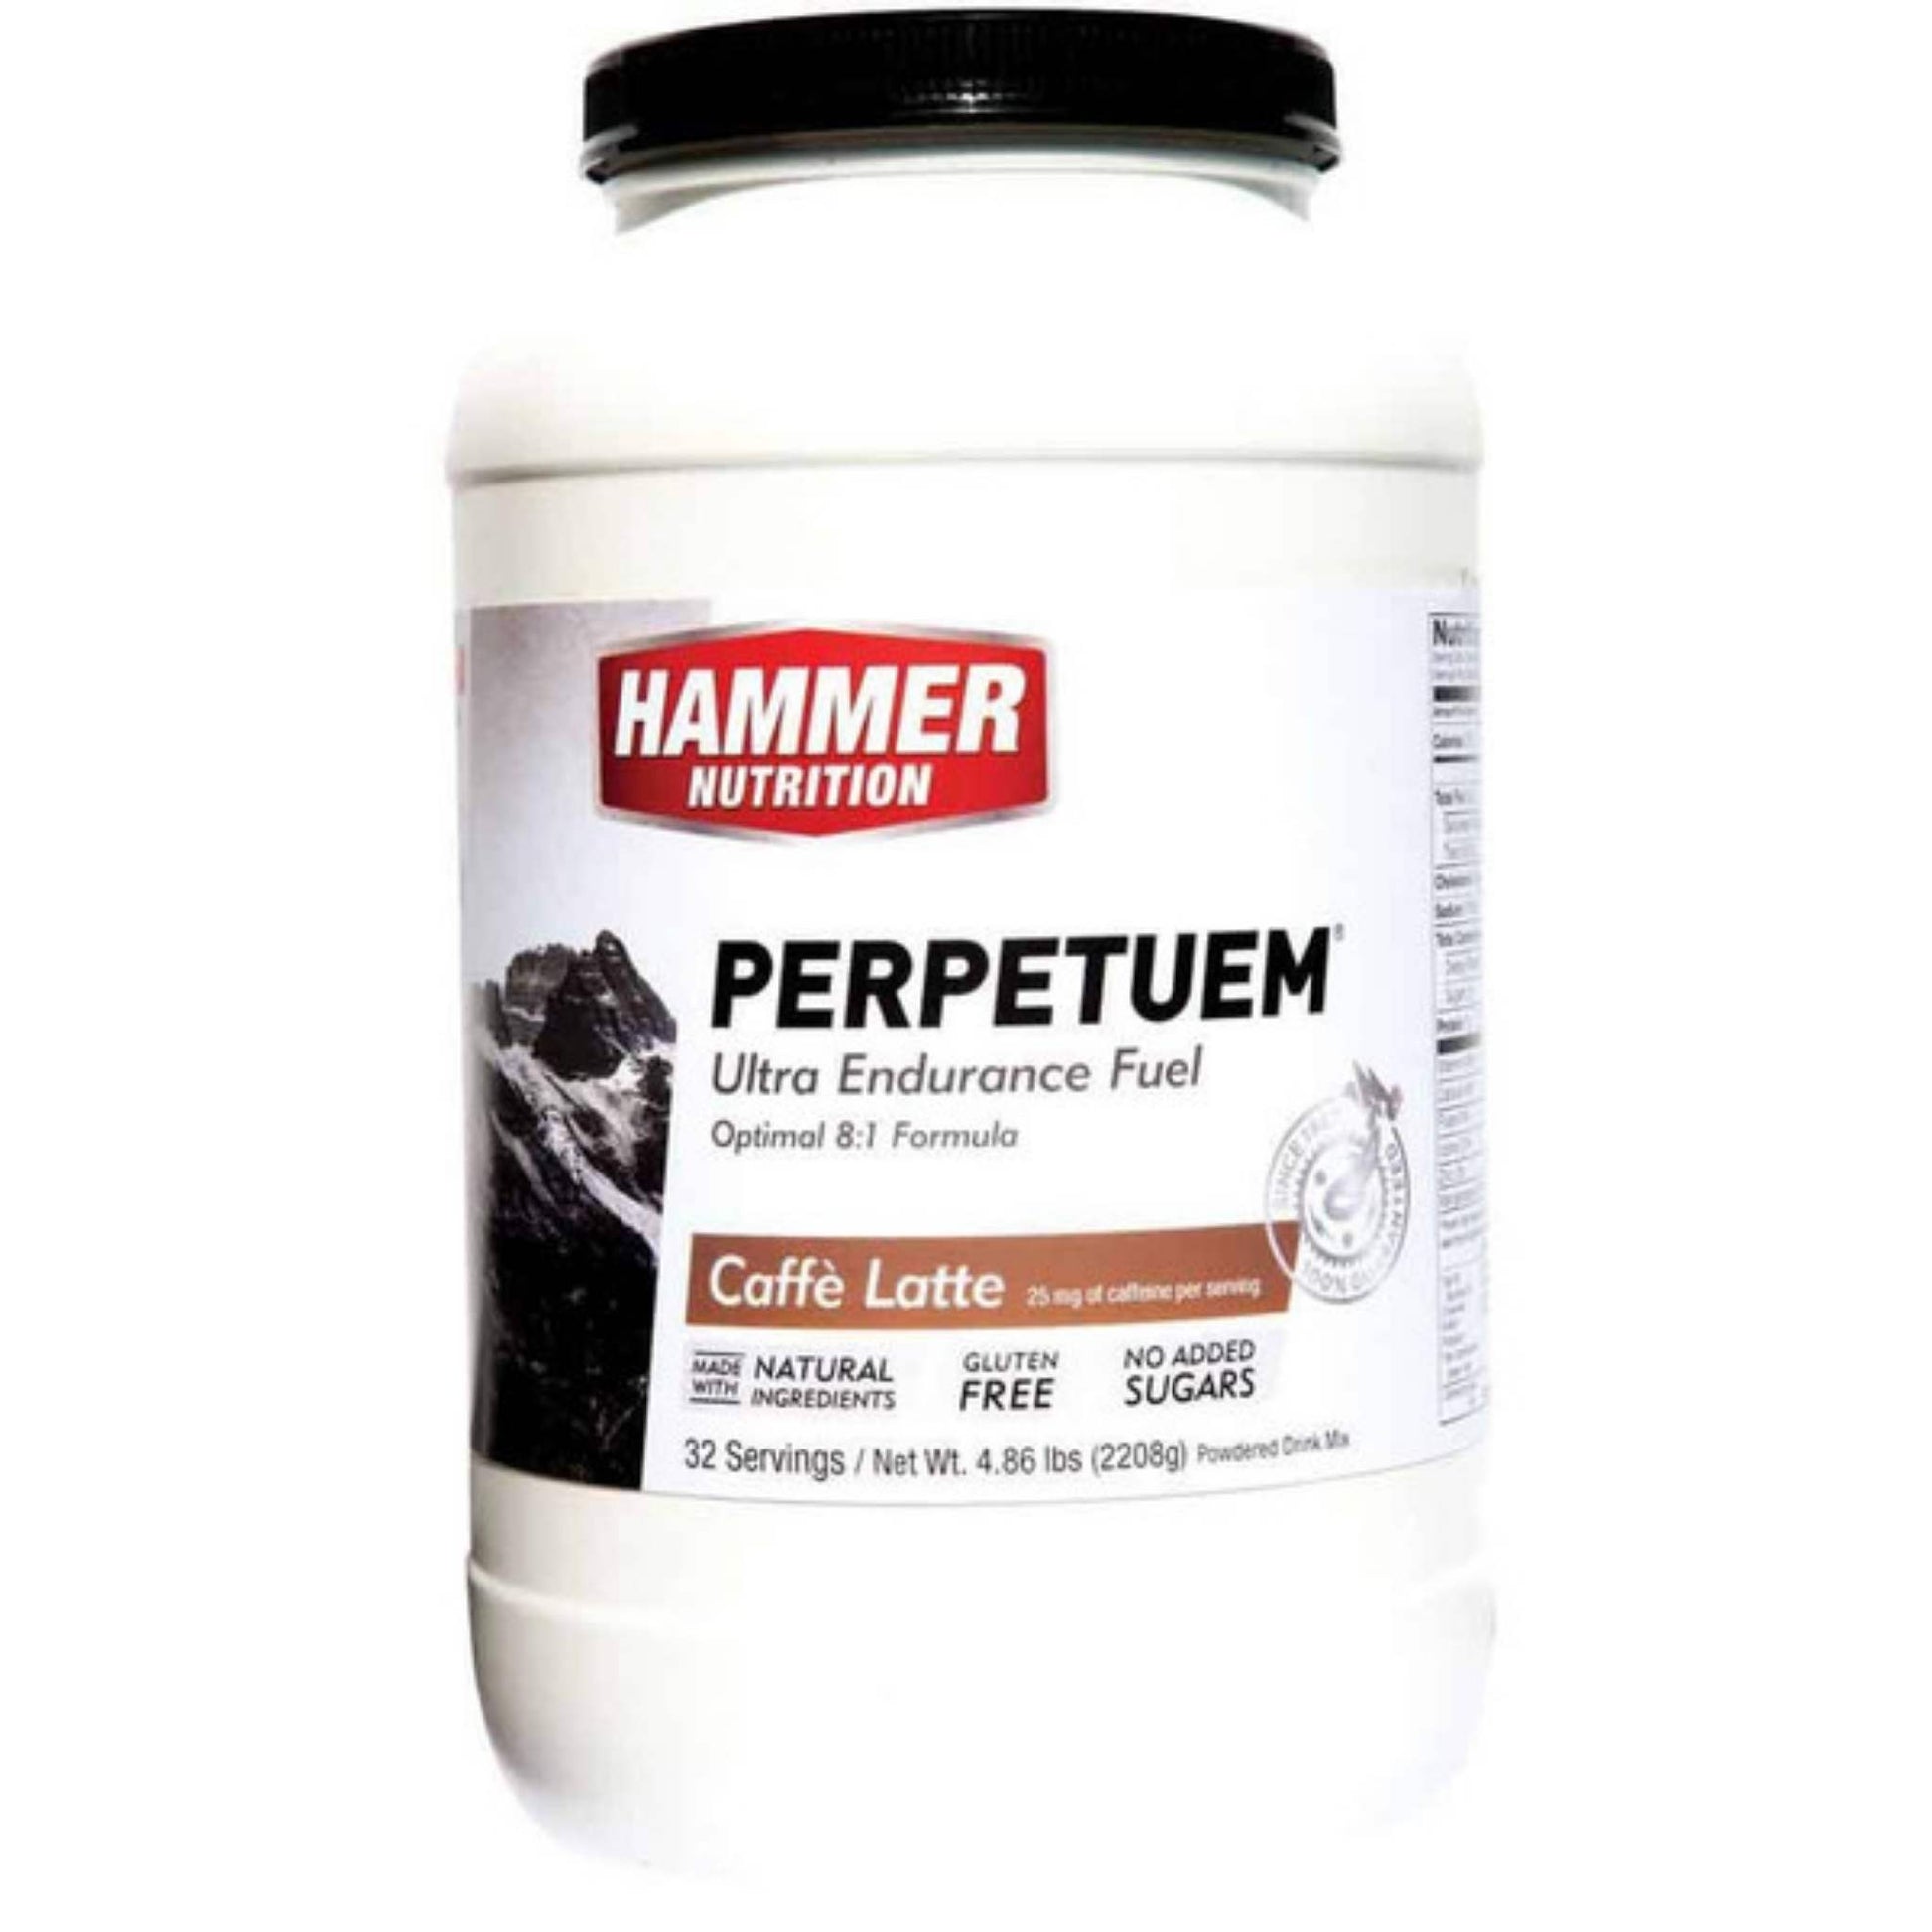 Hammer Nutrition - Perpetuem, Caffe Latte, 32 Servings, Team Perfect